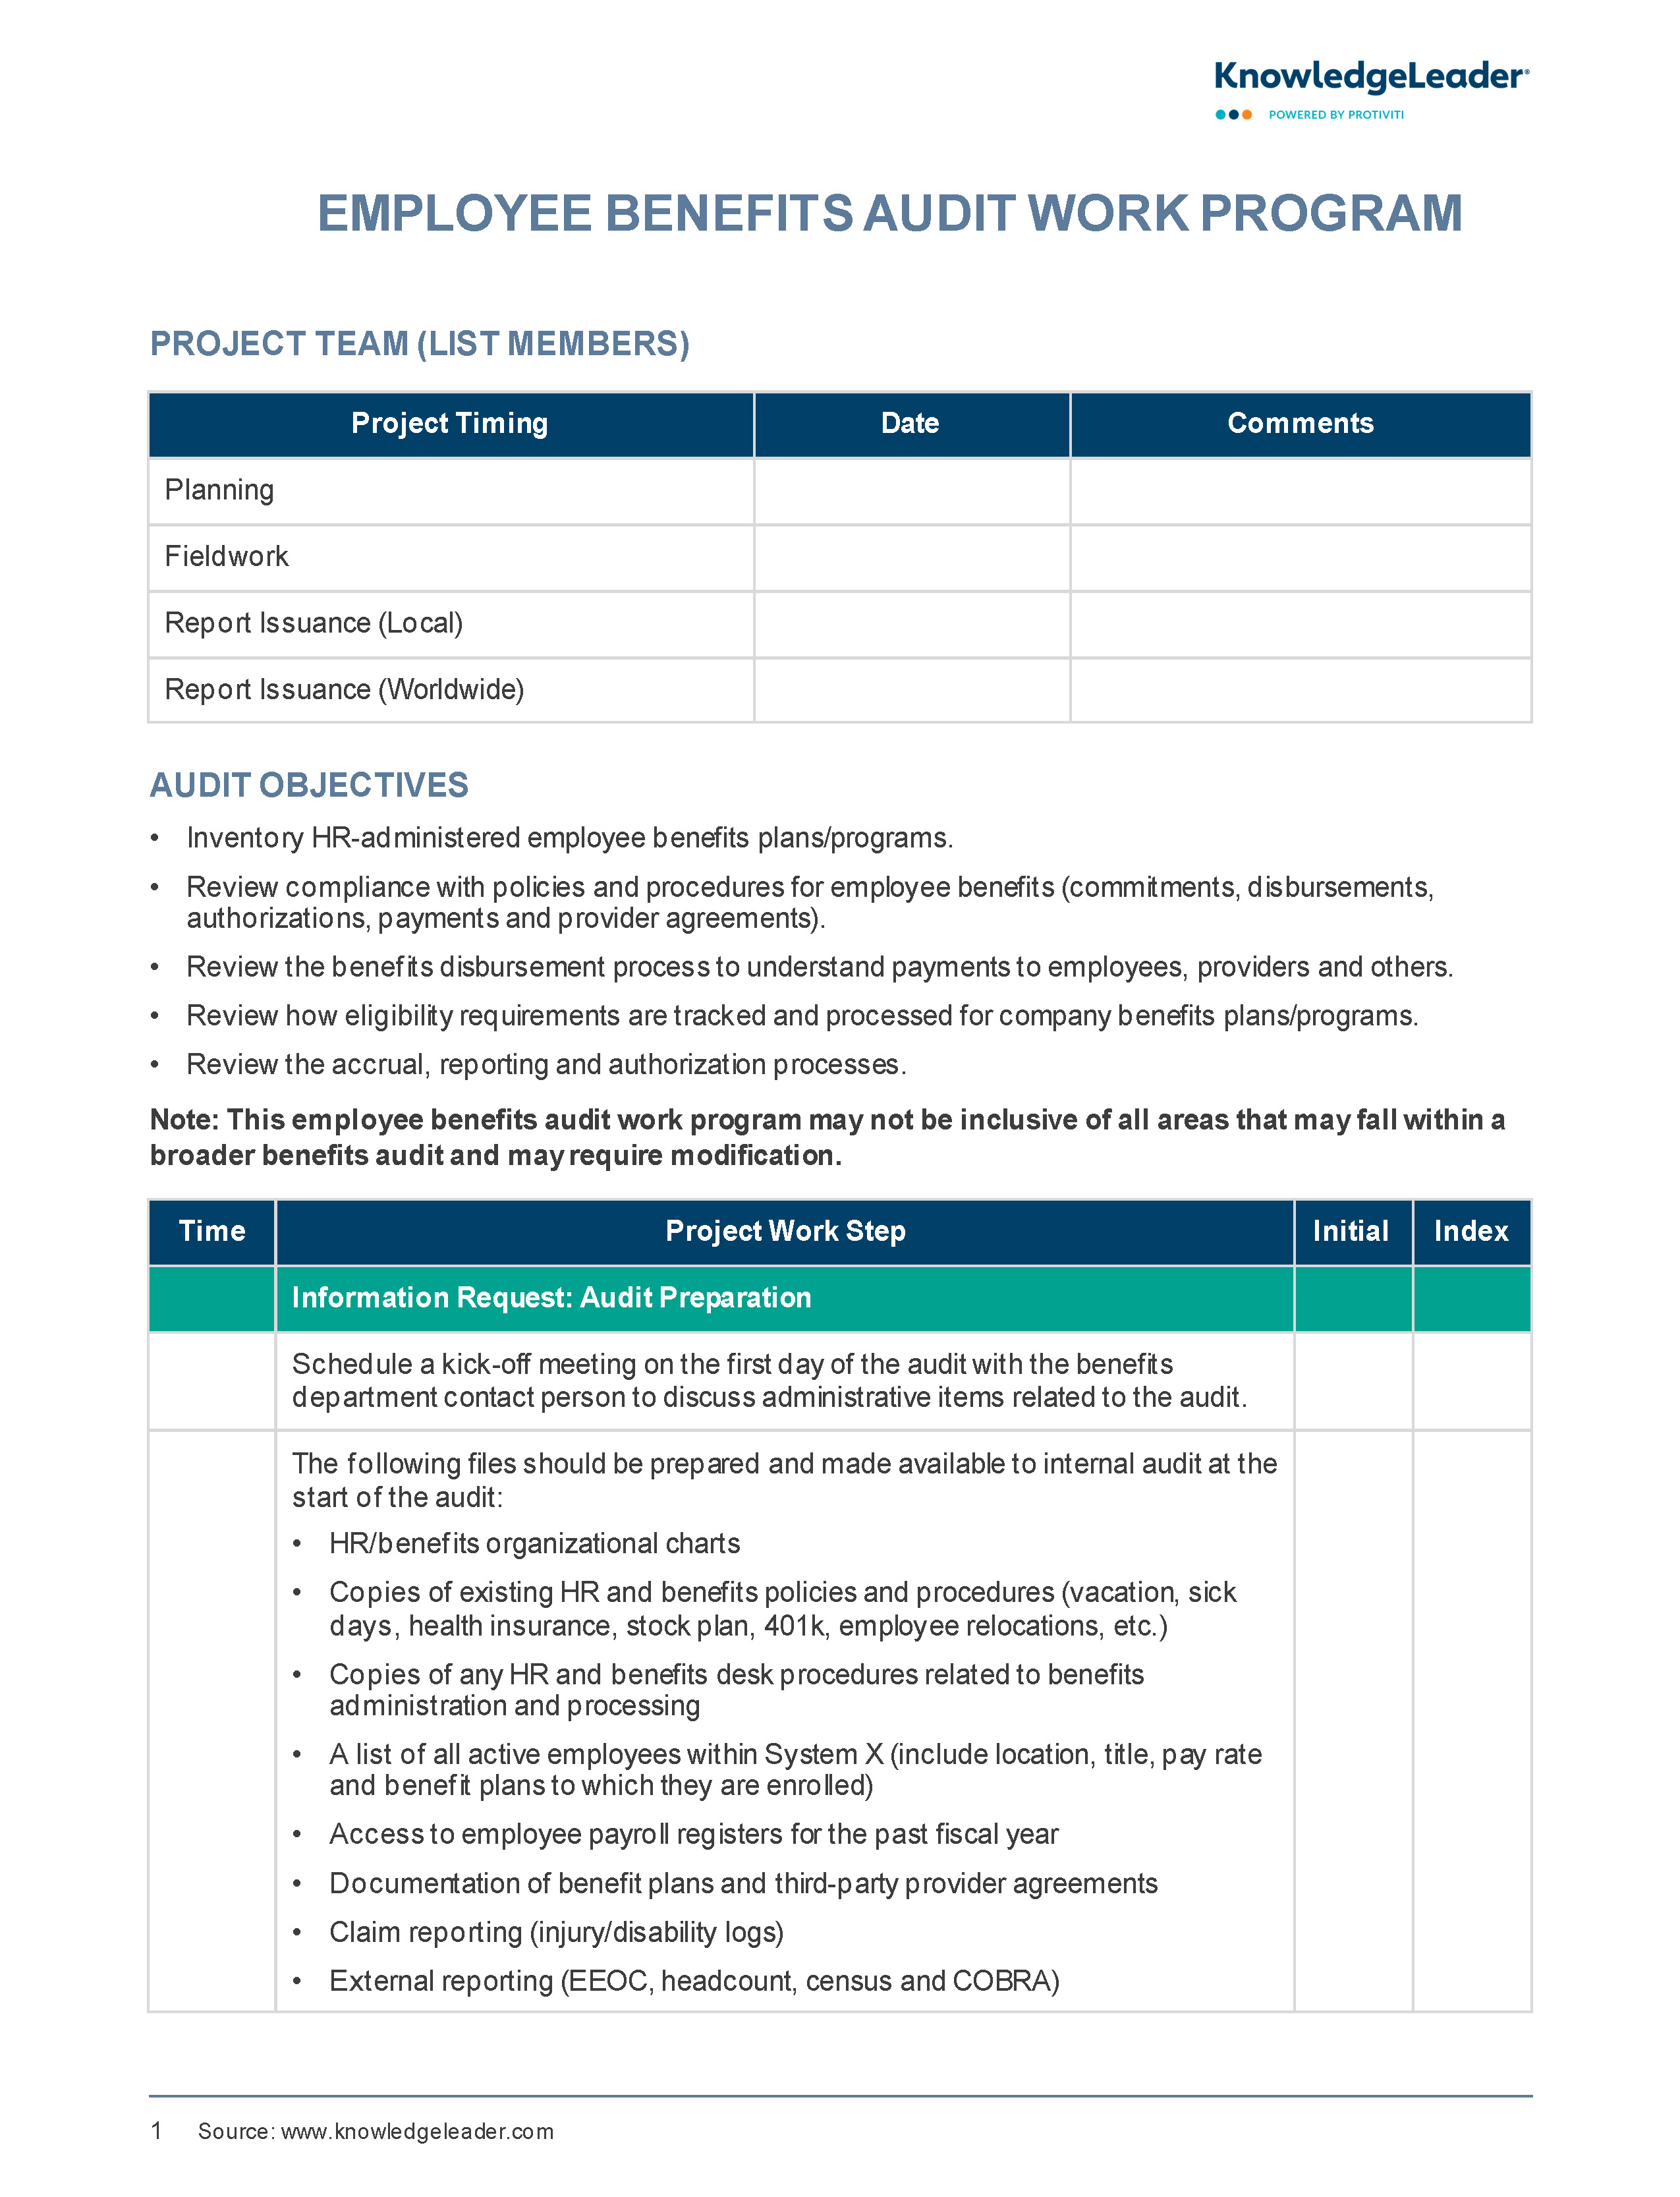 Screenshot of the first page of Employee Benefits Audit Work Program